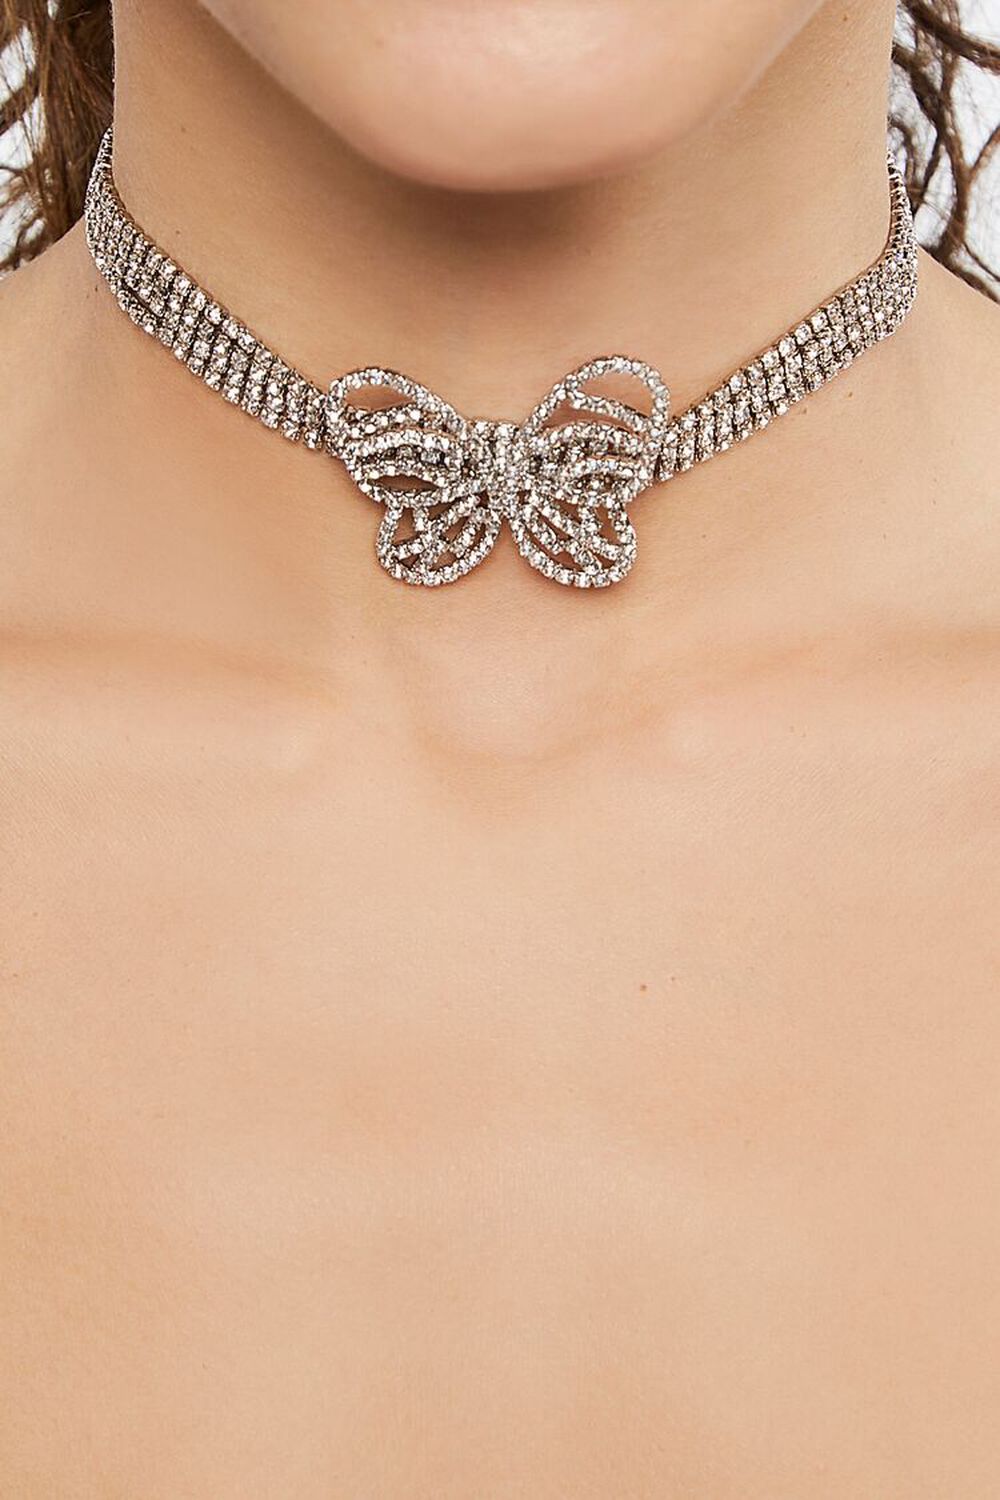 SILVER/CLEAR Butterfly Rhinestone Choker Necklace, image 1